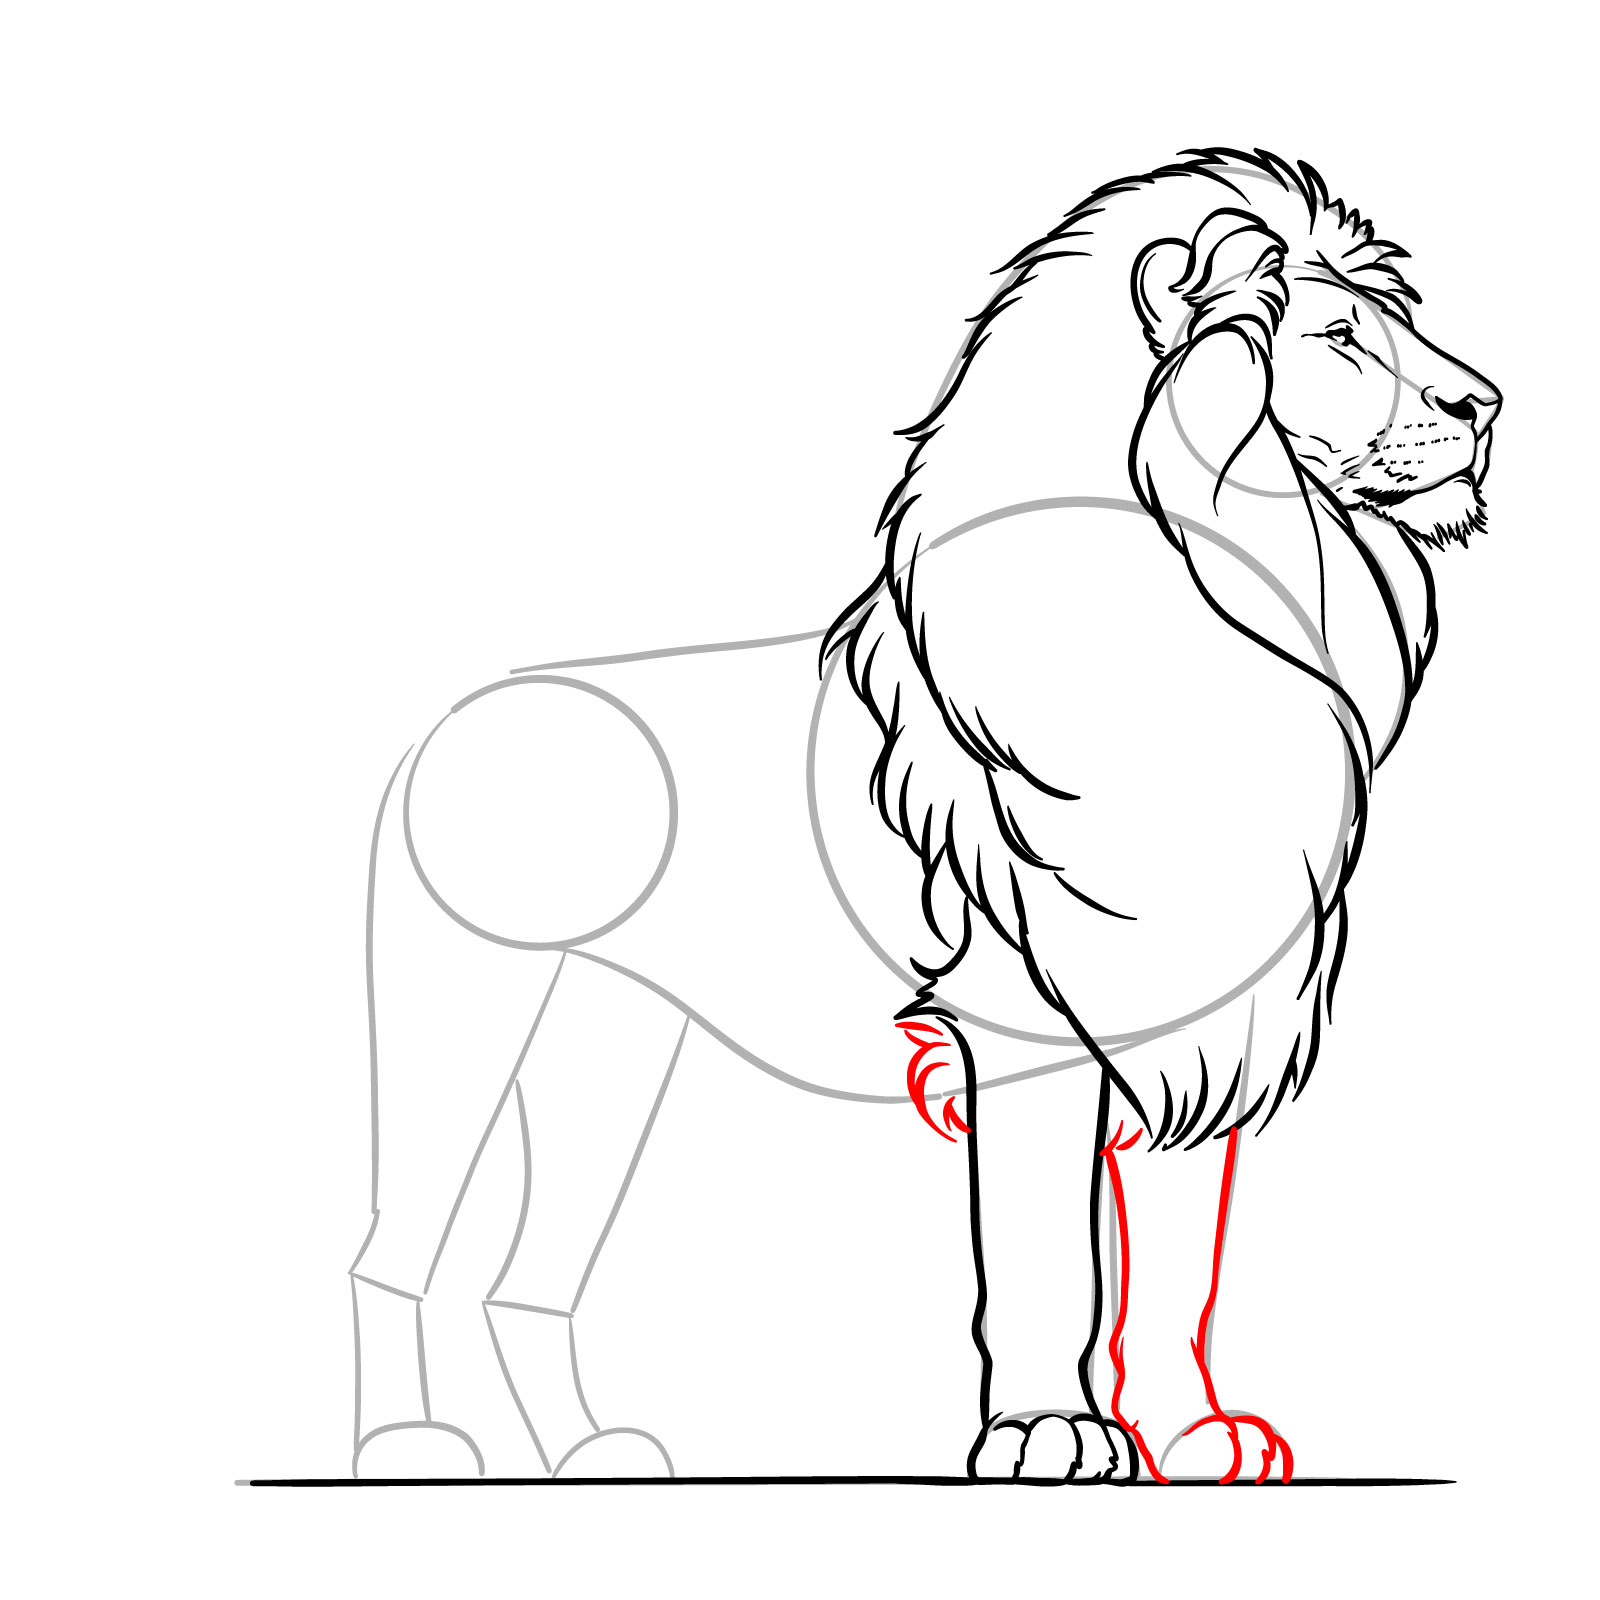 Depicting the second front leg and paw in a lion drawing - step 13